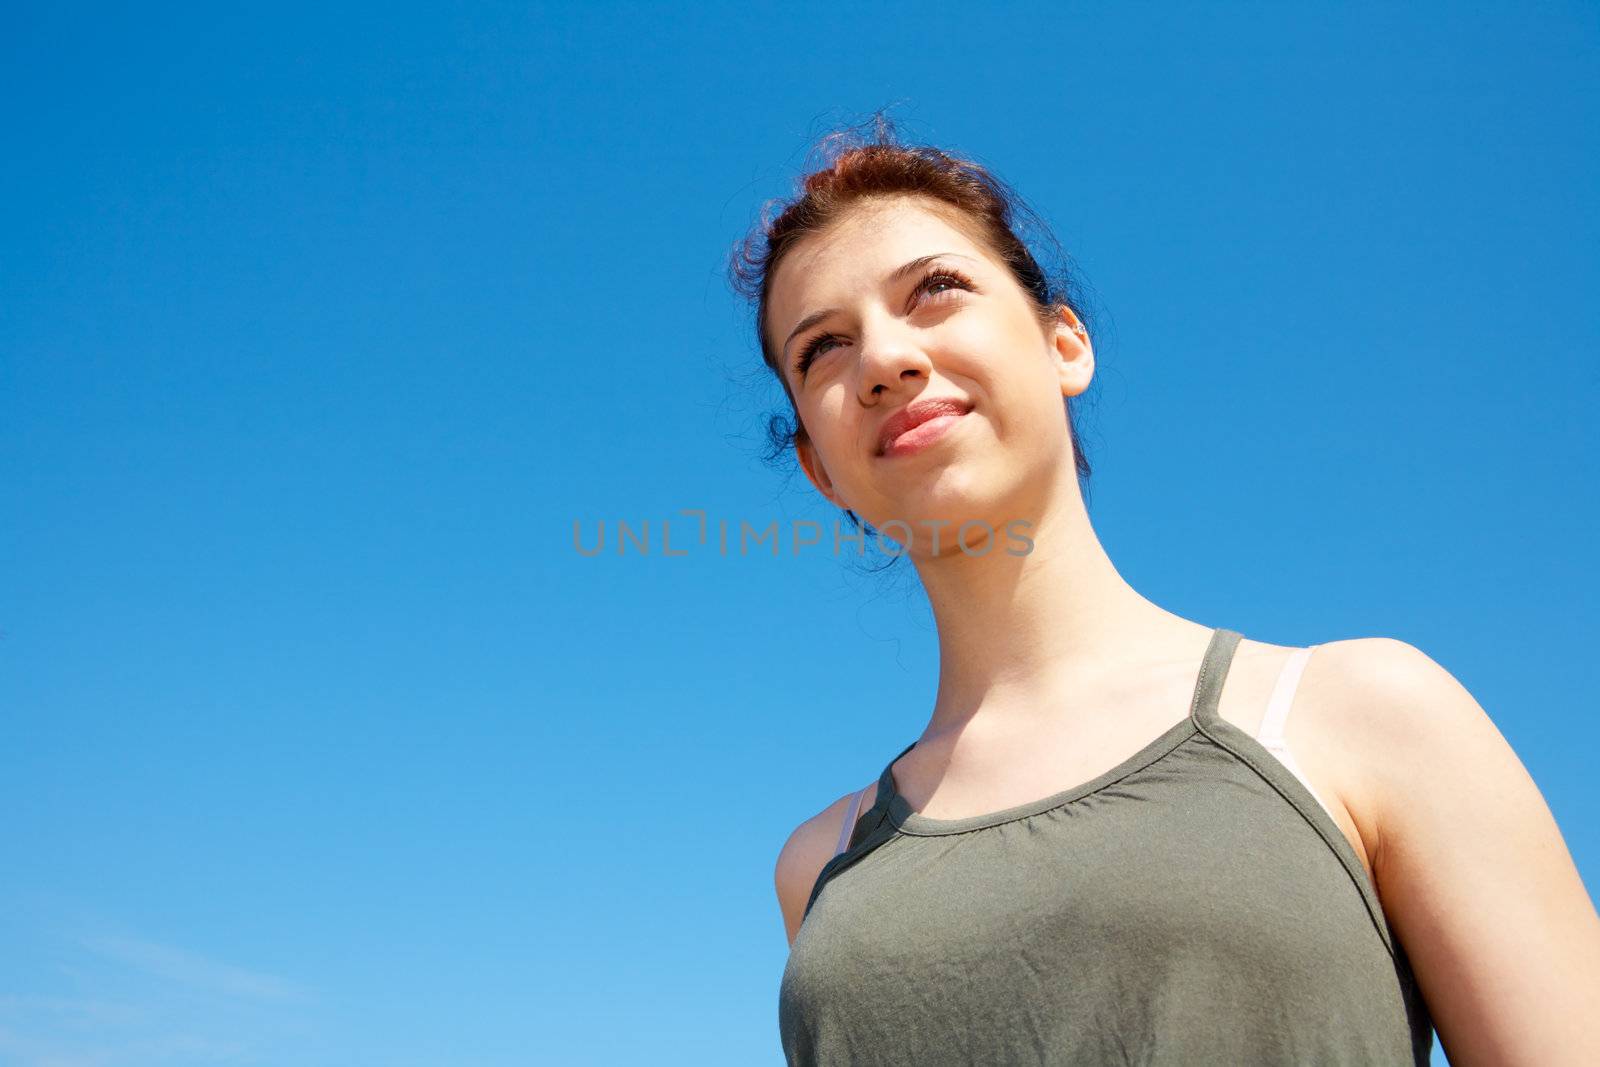 Teenage girl contemplating outdoors against blue sky